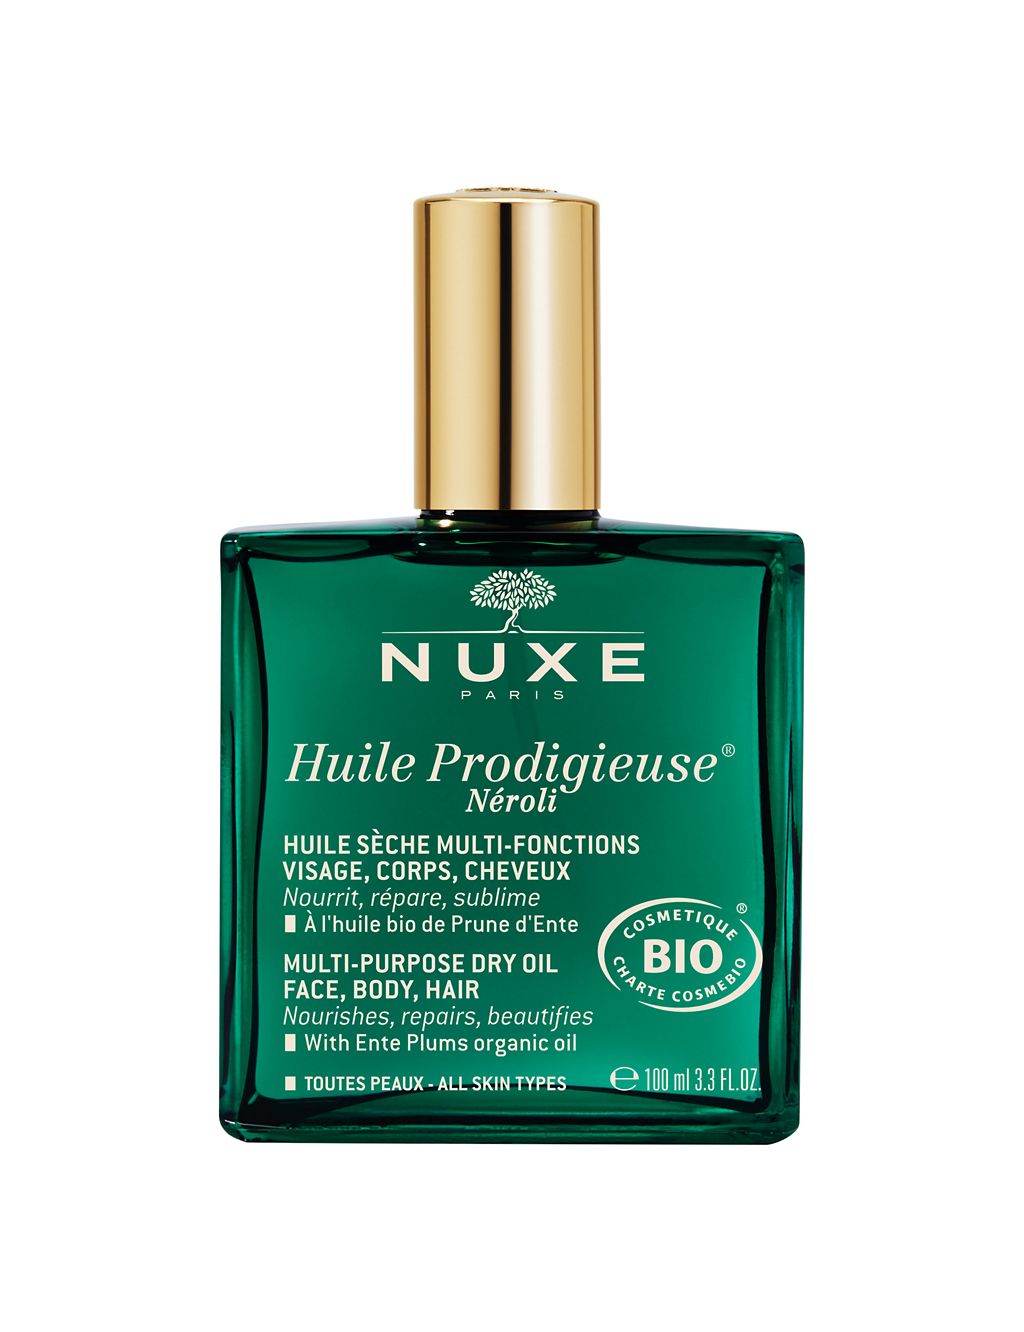 Huile Prodigieuse Neroli Multi-Purpose Dry Oil for Face, Body and Hair 100ml 2 of 8